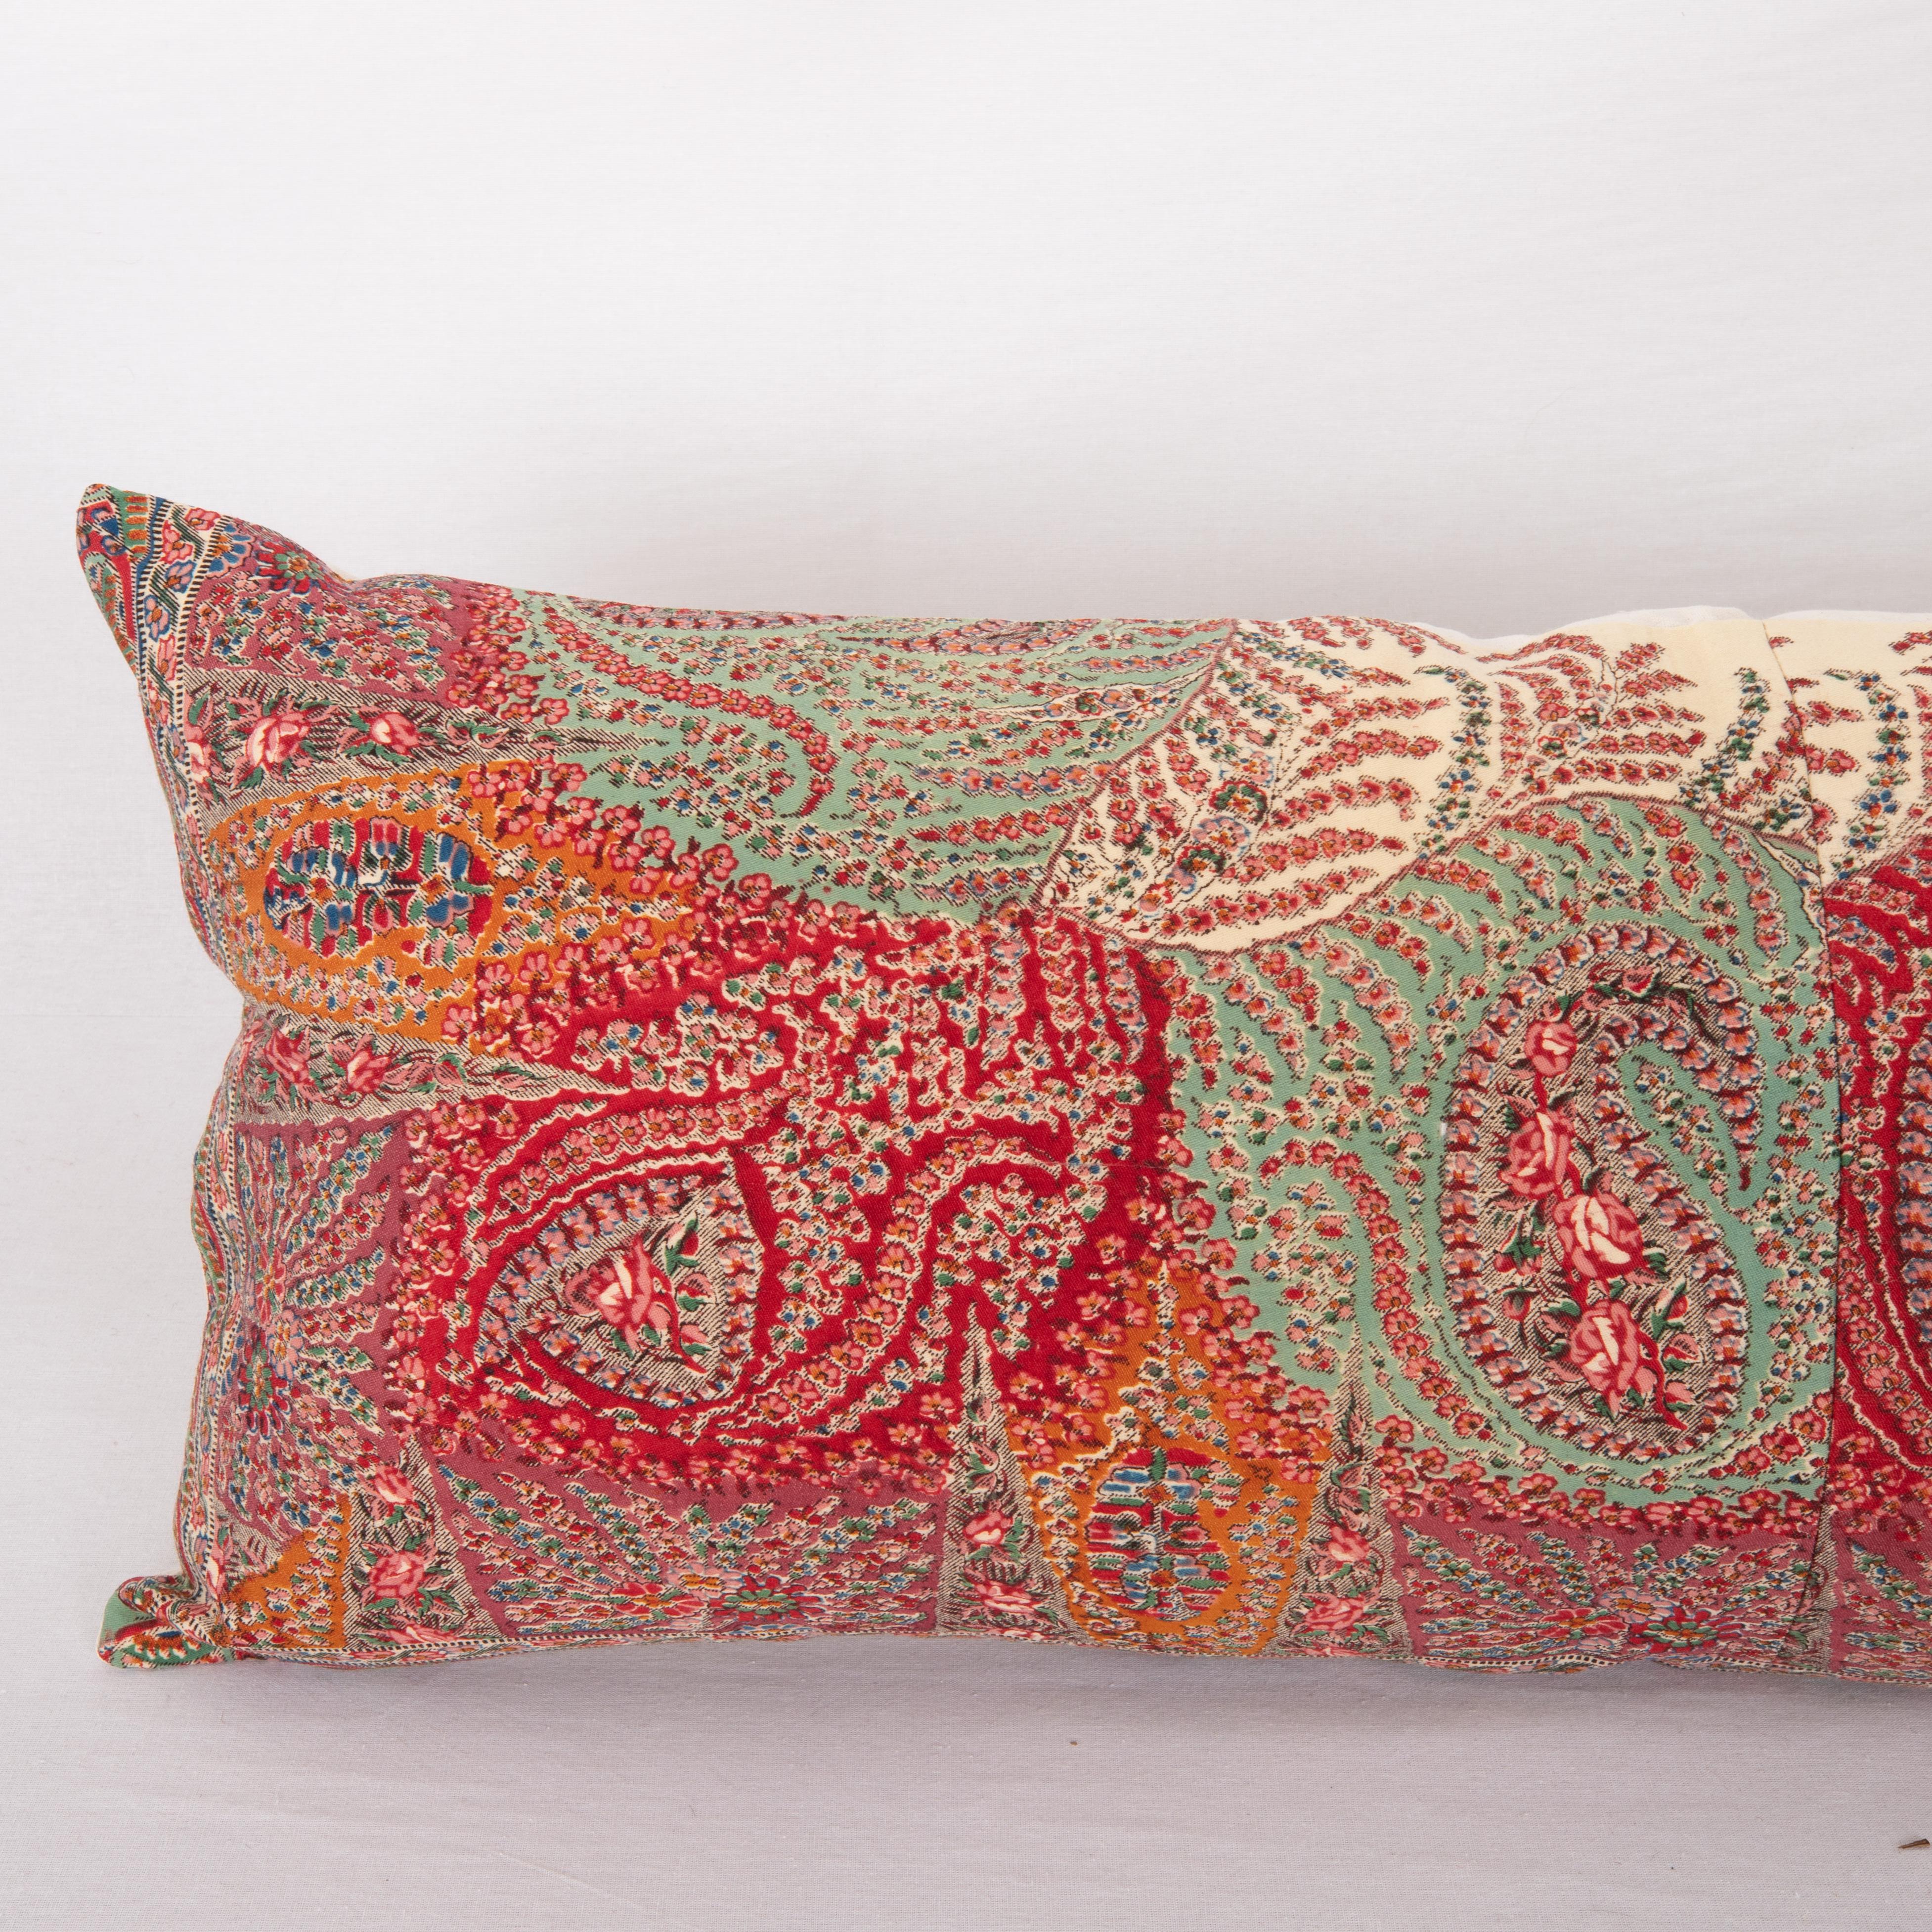 Late Victorian Pillow Cover Made from an English Printed Shawl, 19th C. For Sale